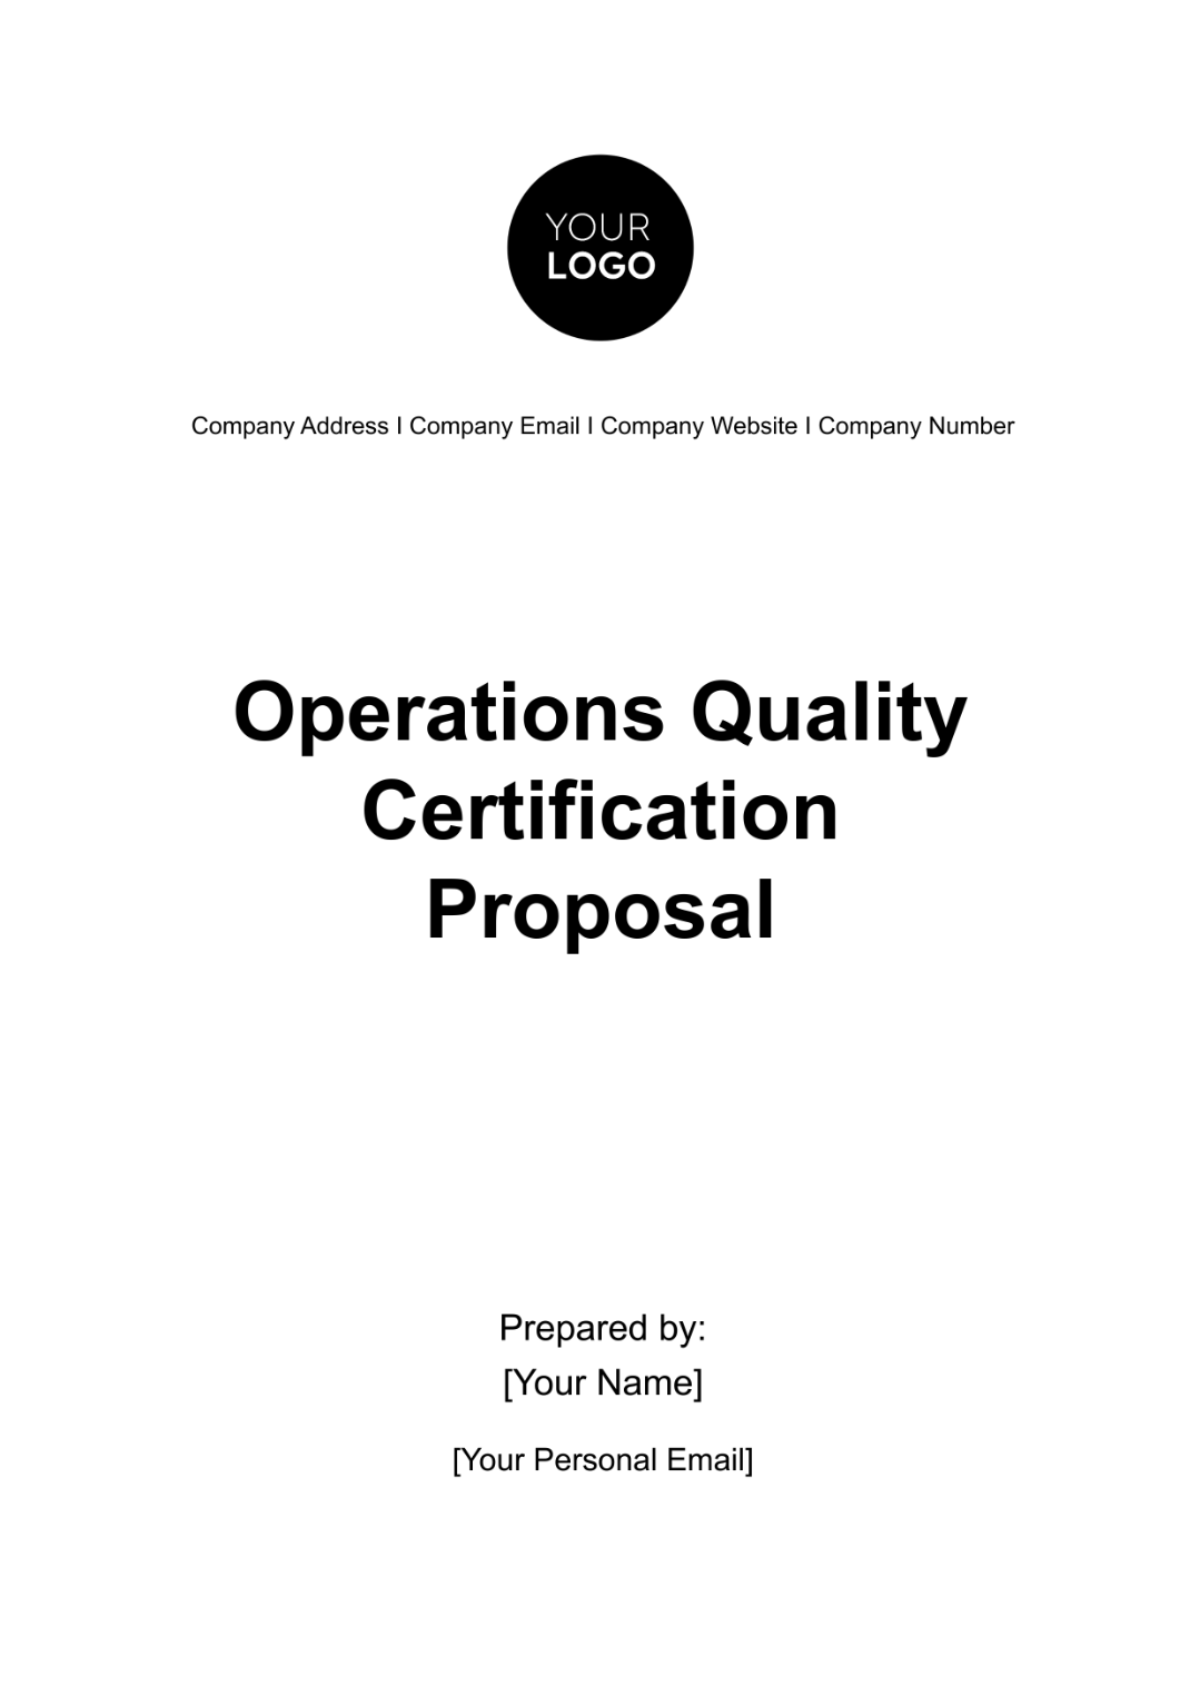 Operations Quality Certification Proposal Template